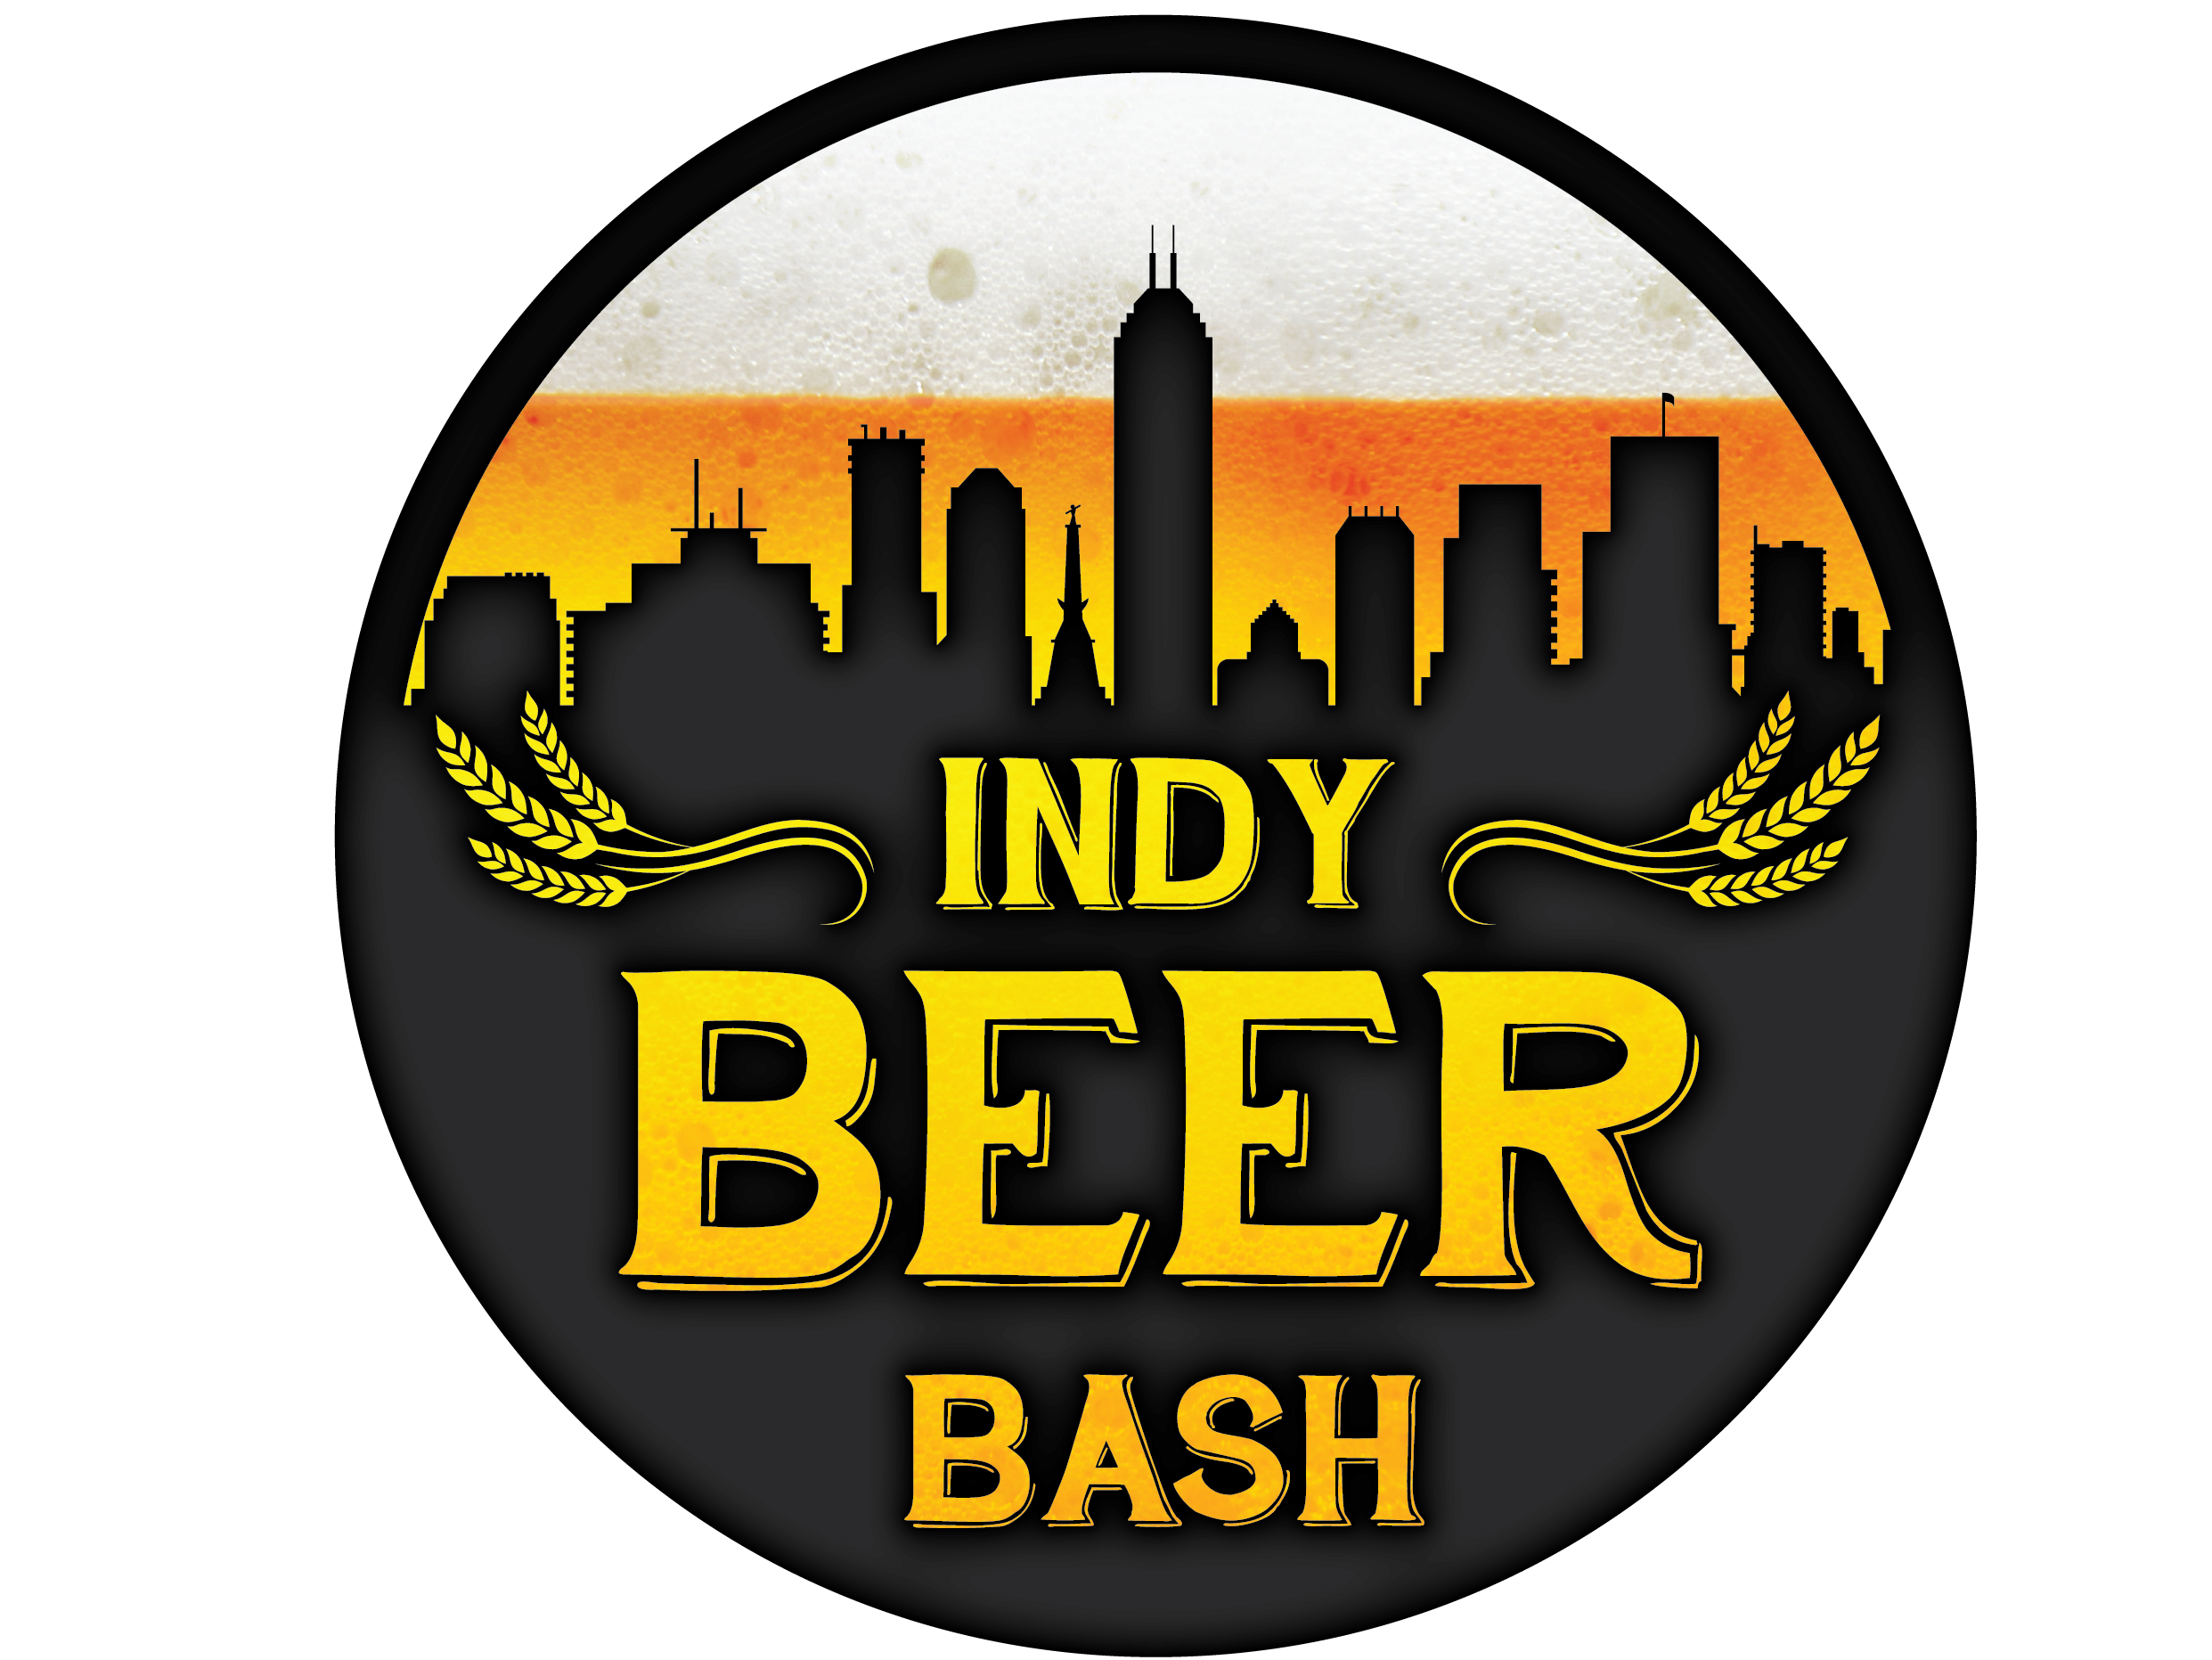 Indiana on Tap Indy Beer Bash Coming to Downtown Indianapolis on